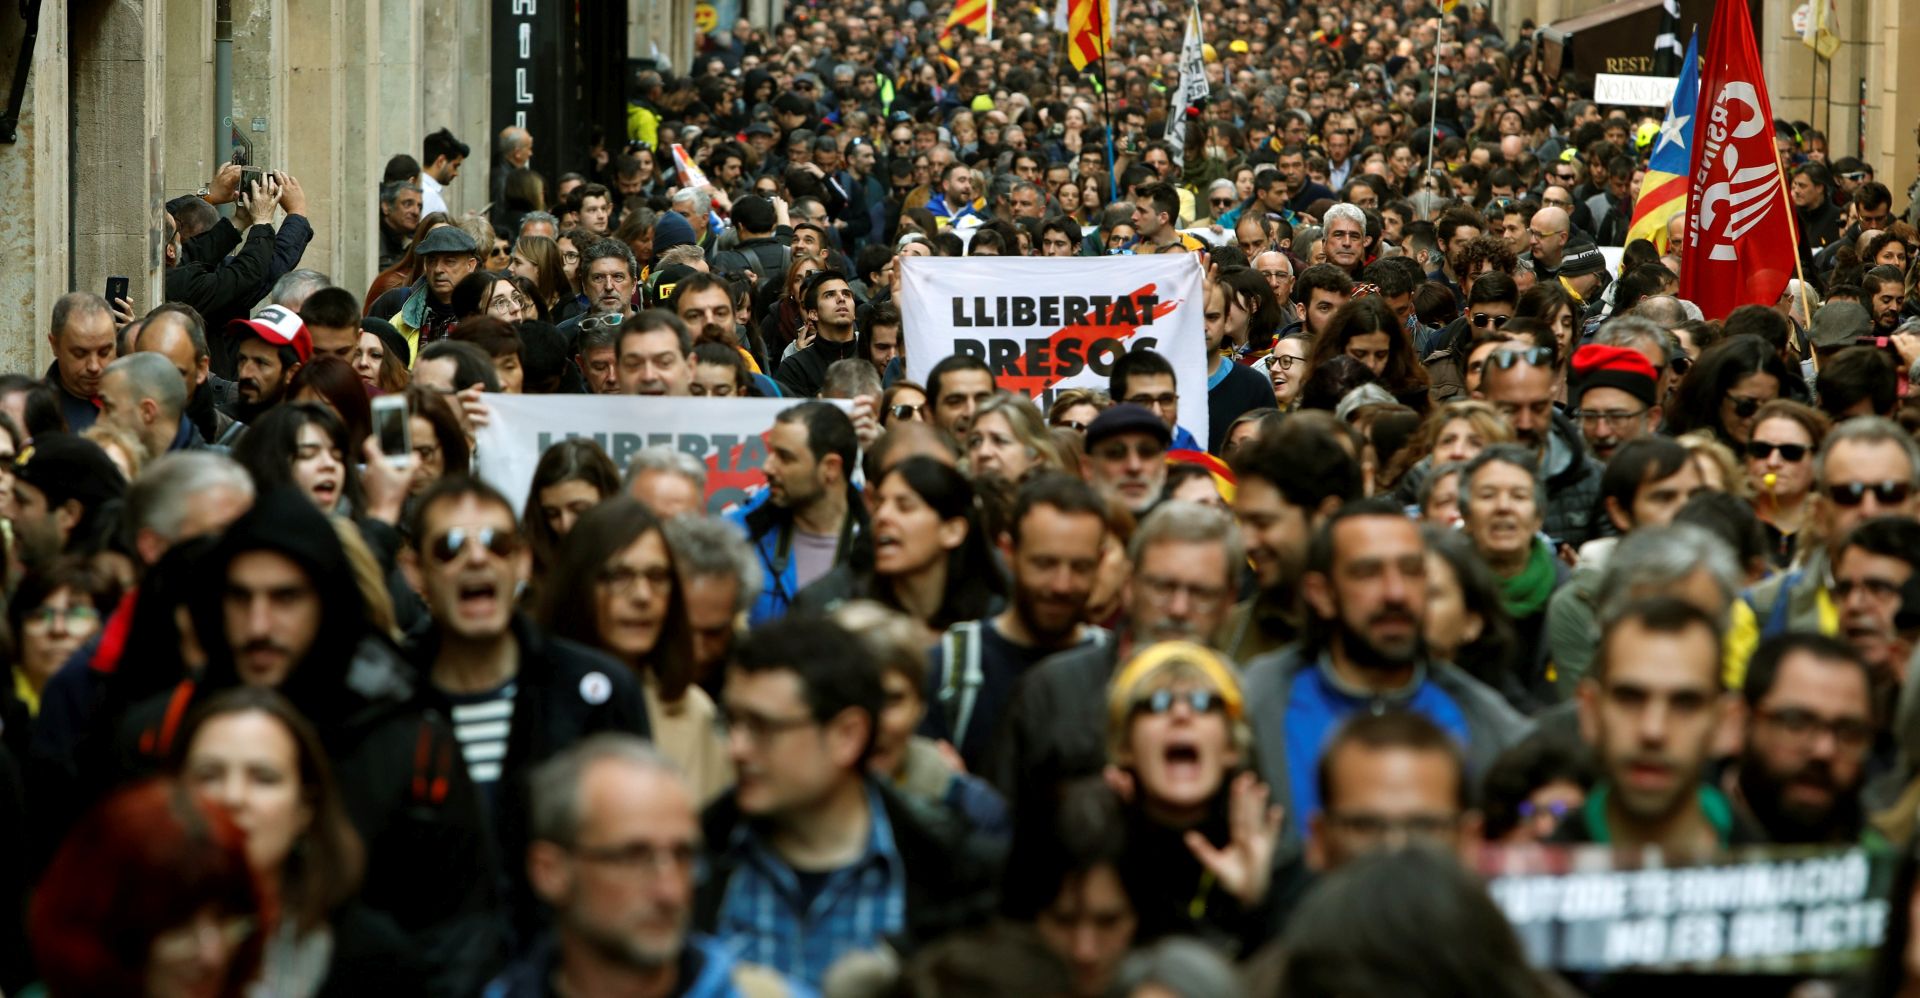 epa07385133 Several thousand demonstrators hold banners reading 'Democracy' during a rally amid the 24-hour Catalan general strike, called by Intersindical-CSIC trade union, in downtown Barcelona, northeastern Spain, 21 February 2019. This protest was called in Catalonia against the case trial of pro-independence defendants at Spain's Supreme Court. This strike is the third one, directly linked to pro-independence process, that was called in the Spanish region. The first Catalan 'national' strike was called on 03 October 2017, two days after October 1st referendum, and the second one was organized on 08 November 2017.  EPA/Toni Albir